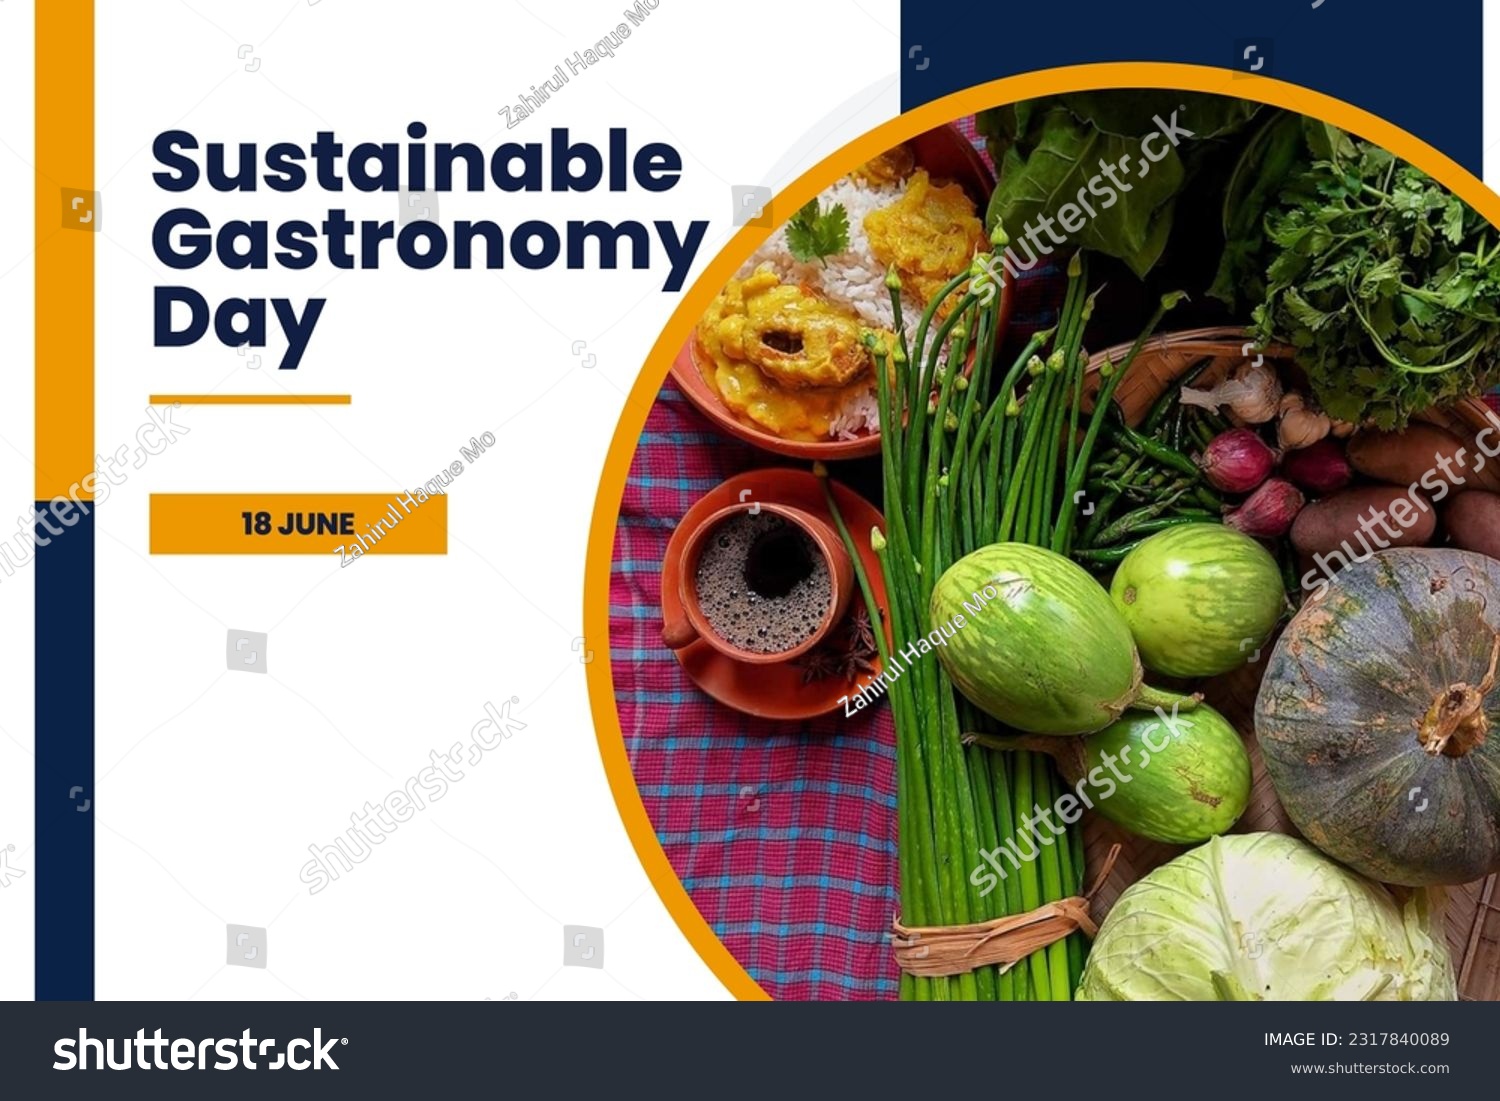 Sustainable Gastronomy Day 18 June #2317840089